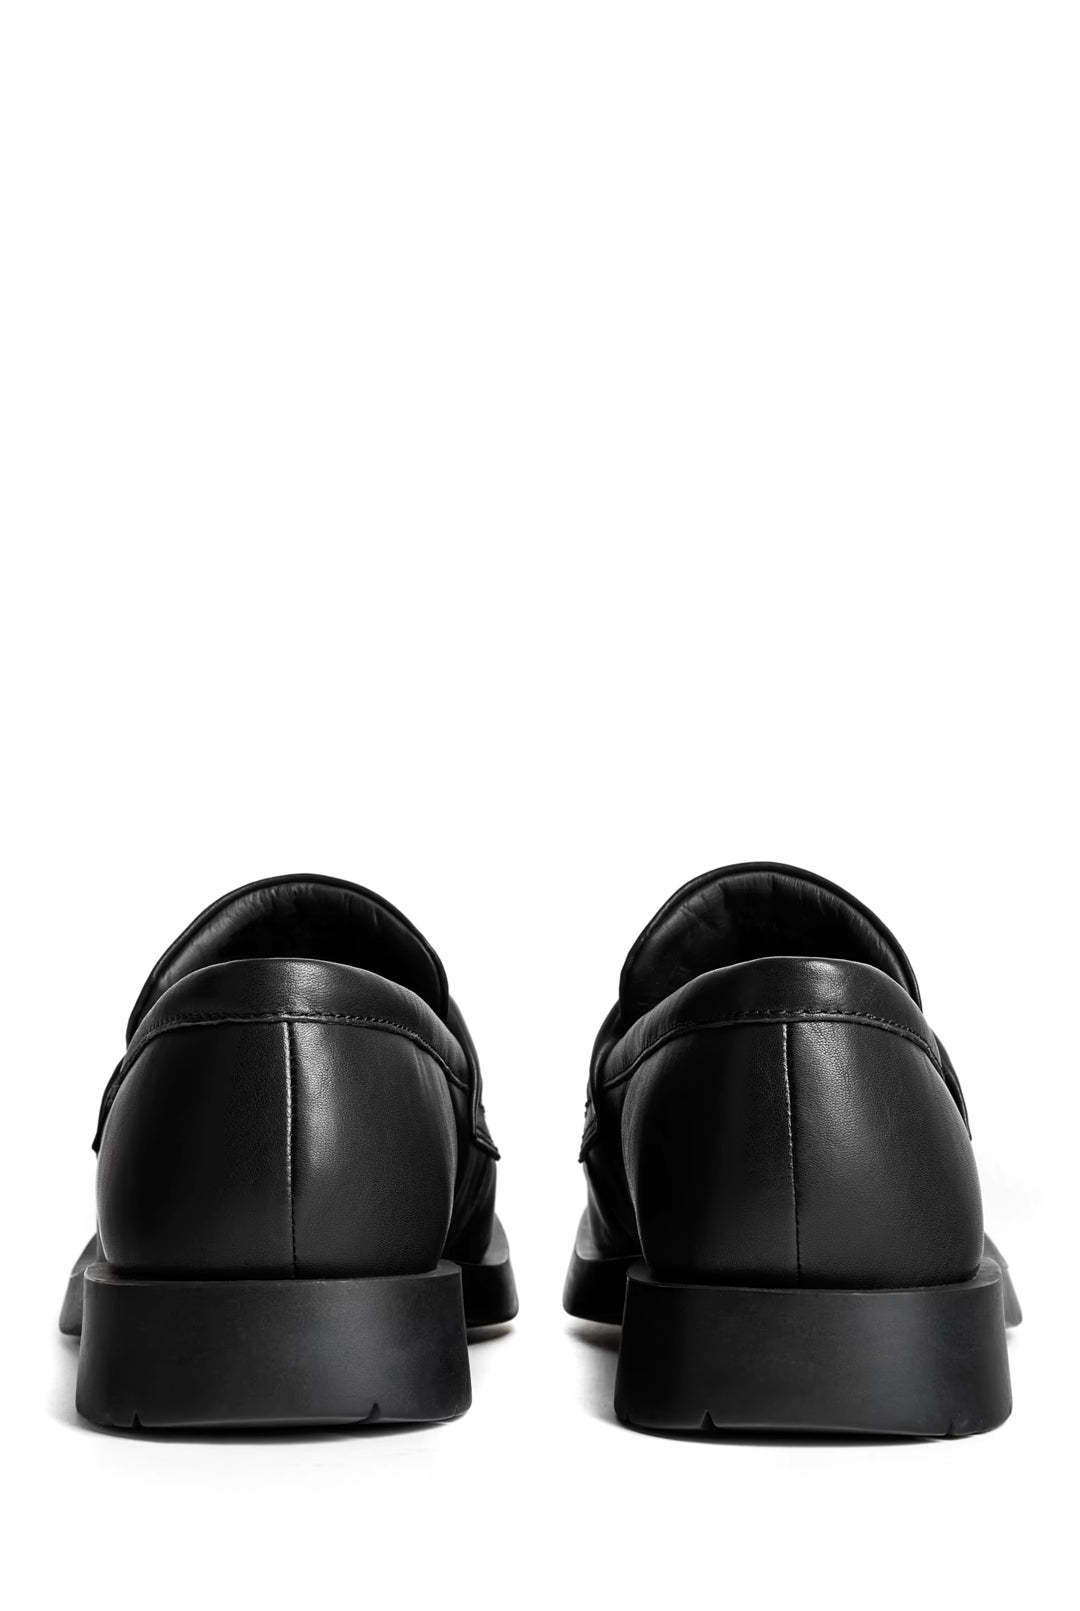 CamperLab MIL 1978 Puffy Loafers, Black